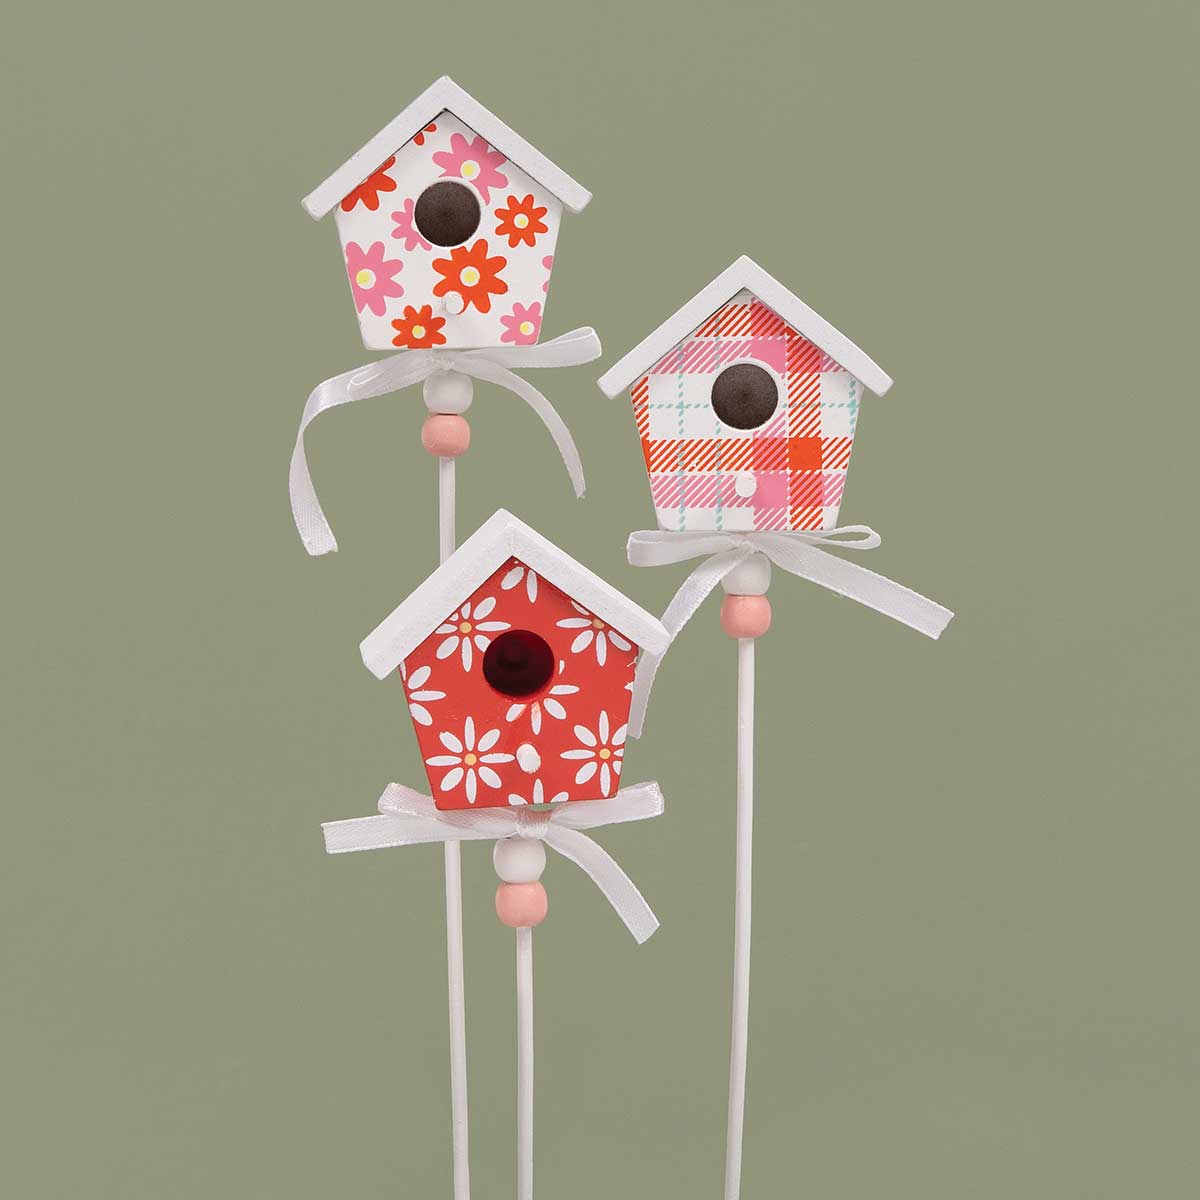 b50 BIRDHOUSE ON STICK 3 ASSORTED 2.25IN X 1IN X 2.25IN WOOD